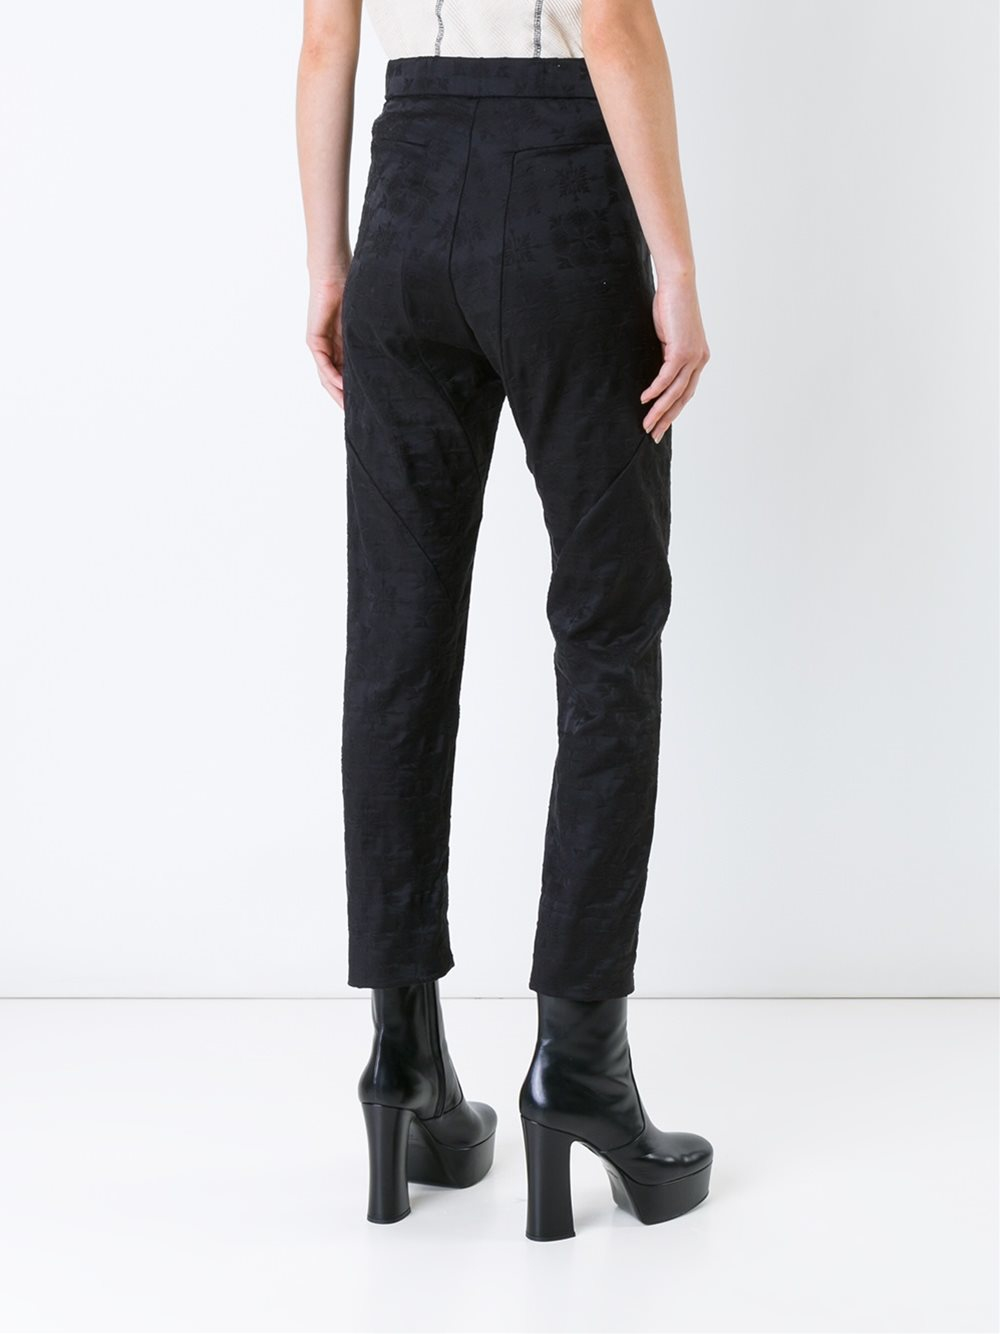 Lyst - Assin Jacquard Tailored Trousers in Black